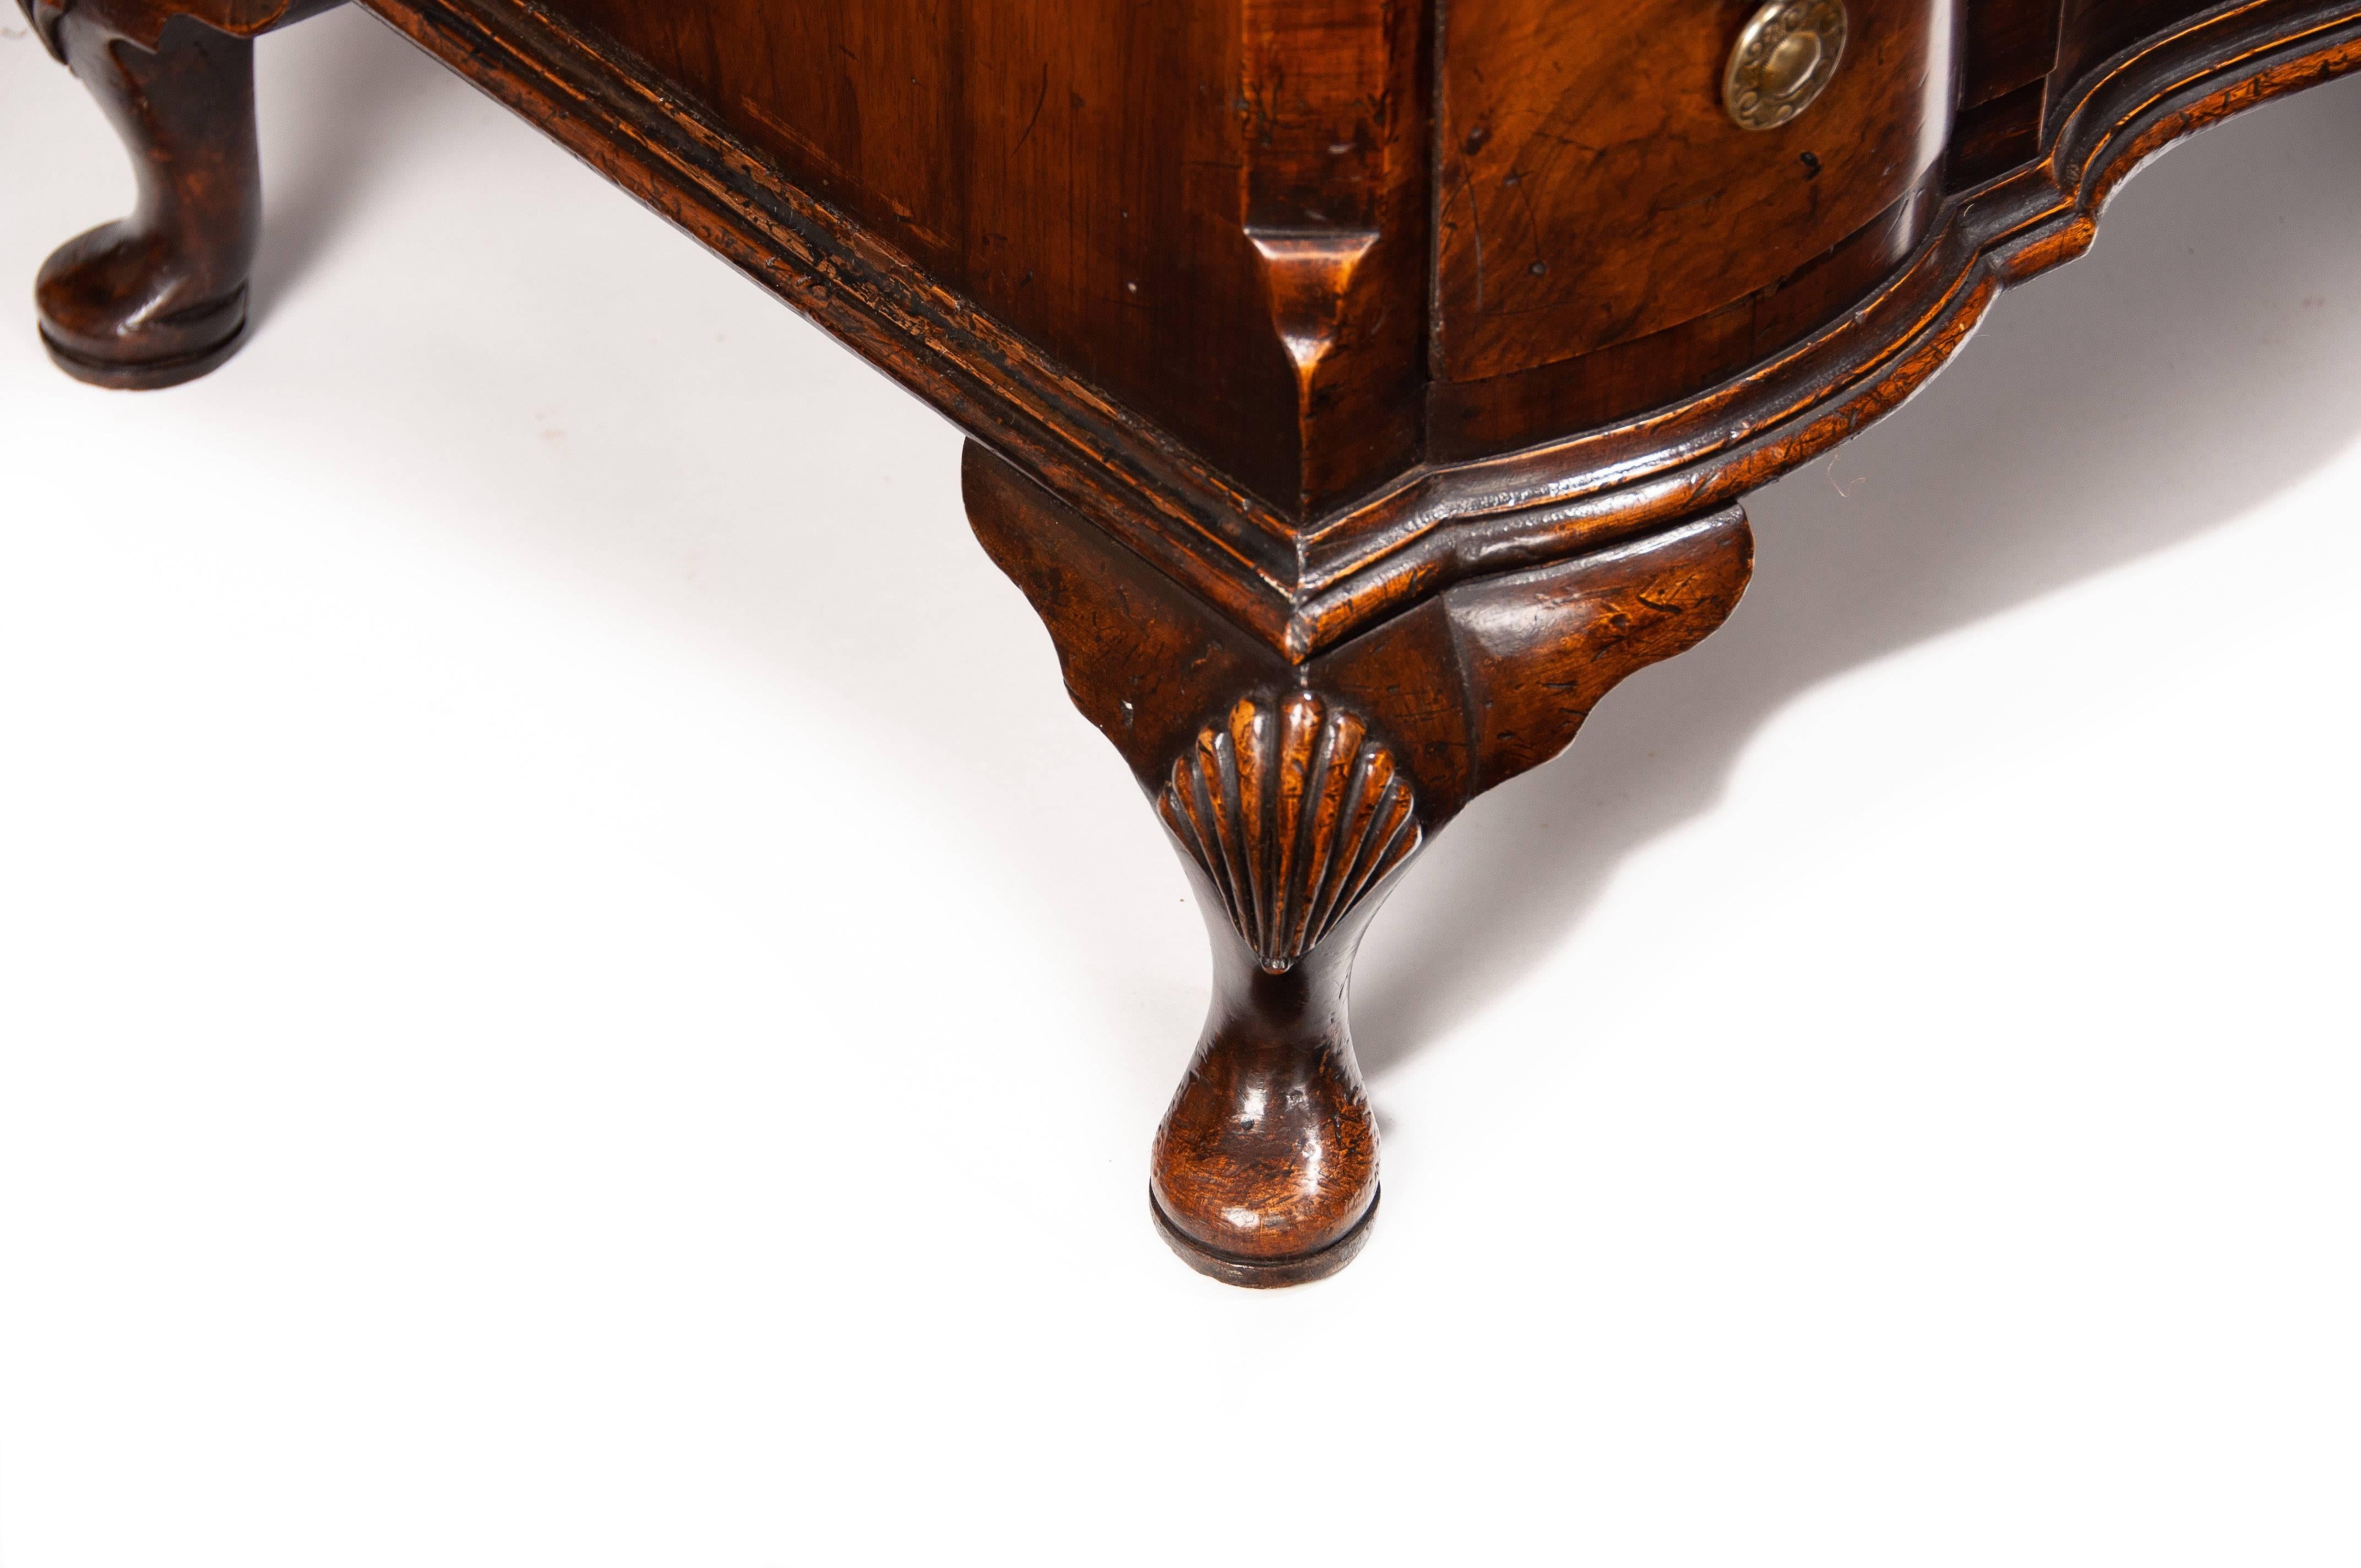 Polished Antique Walnut Chest of Drawers of an Elegant Shaped Front Design